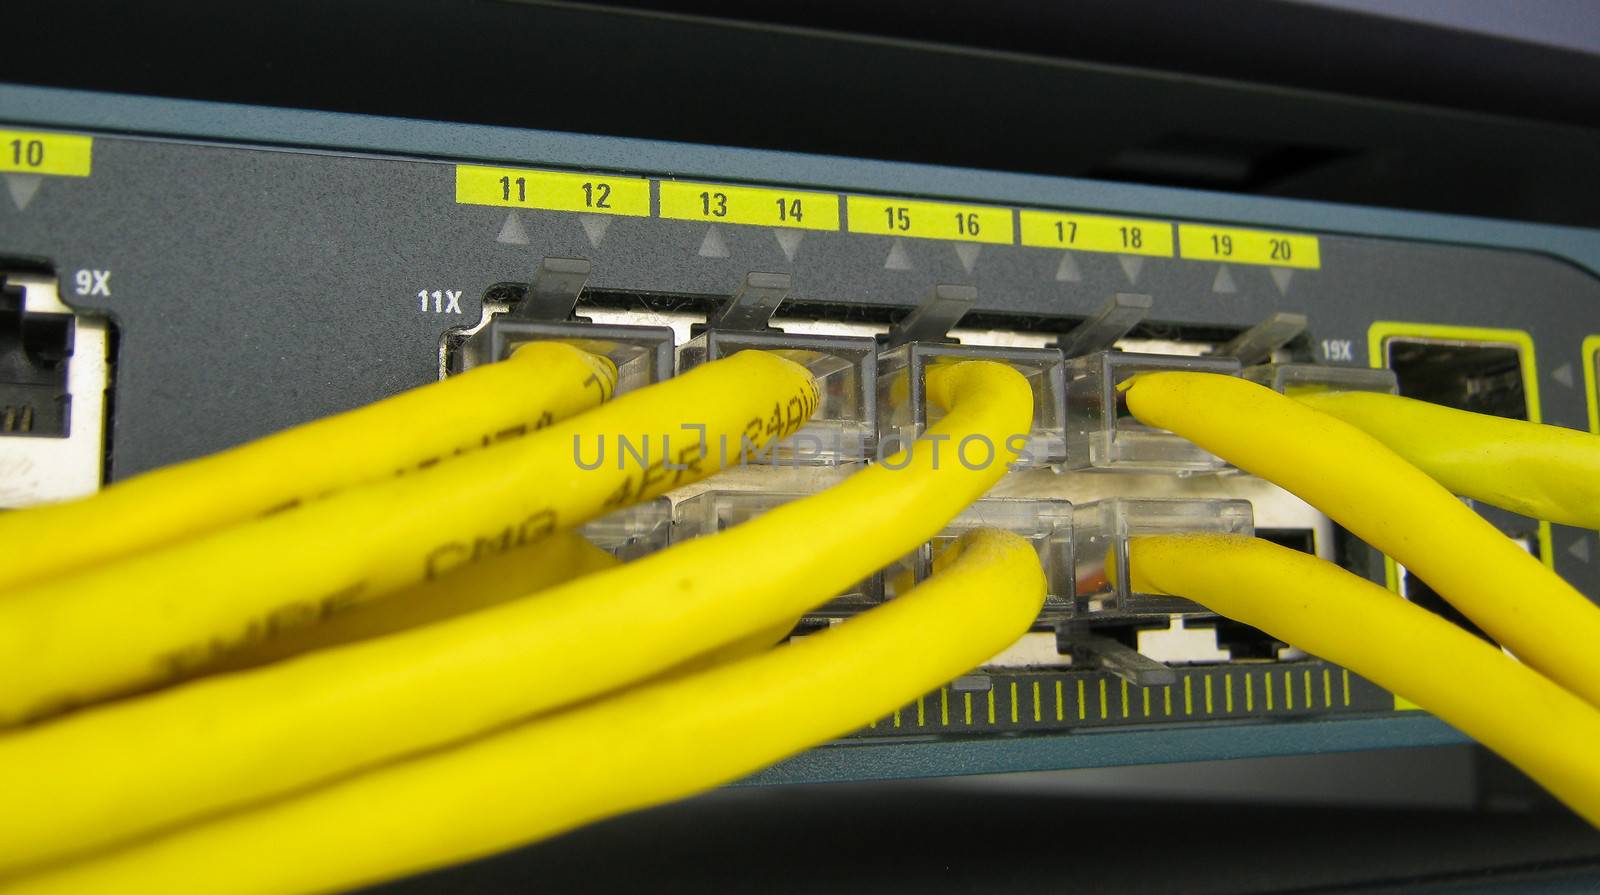 Ethernet RJ45 cables are connected to internet switch by Sorapop